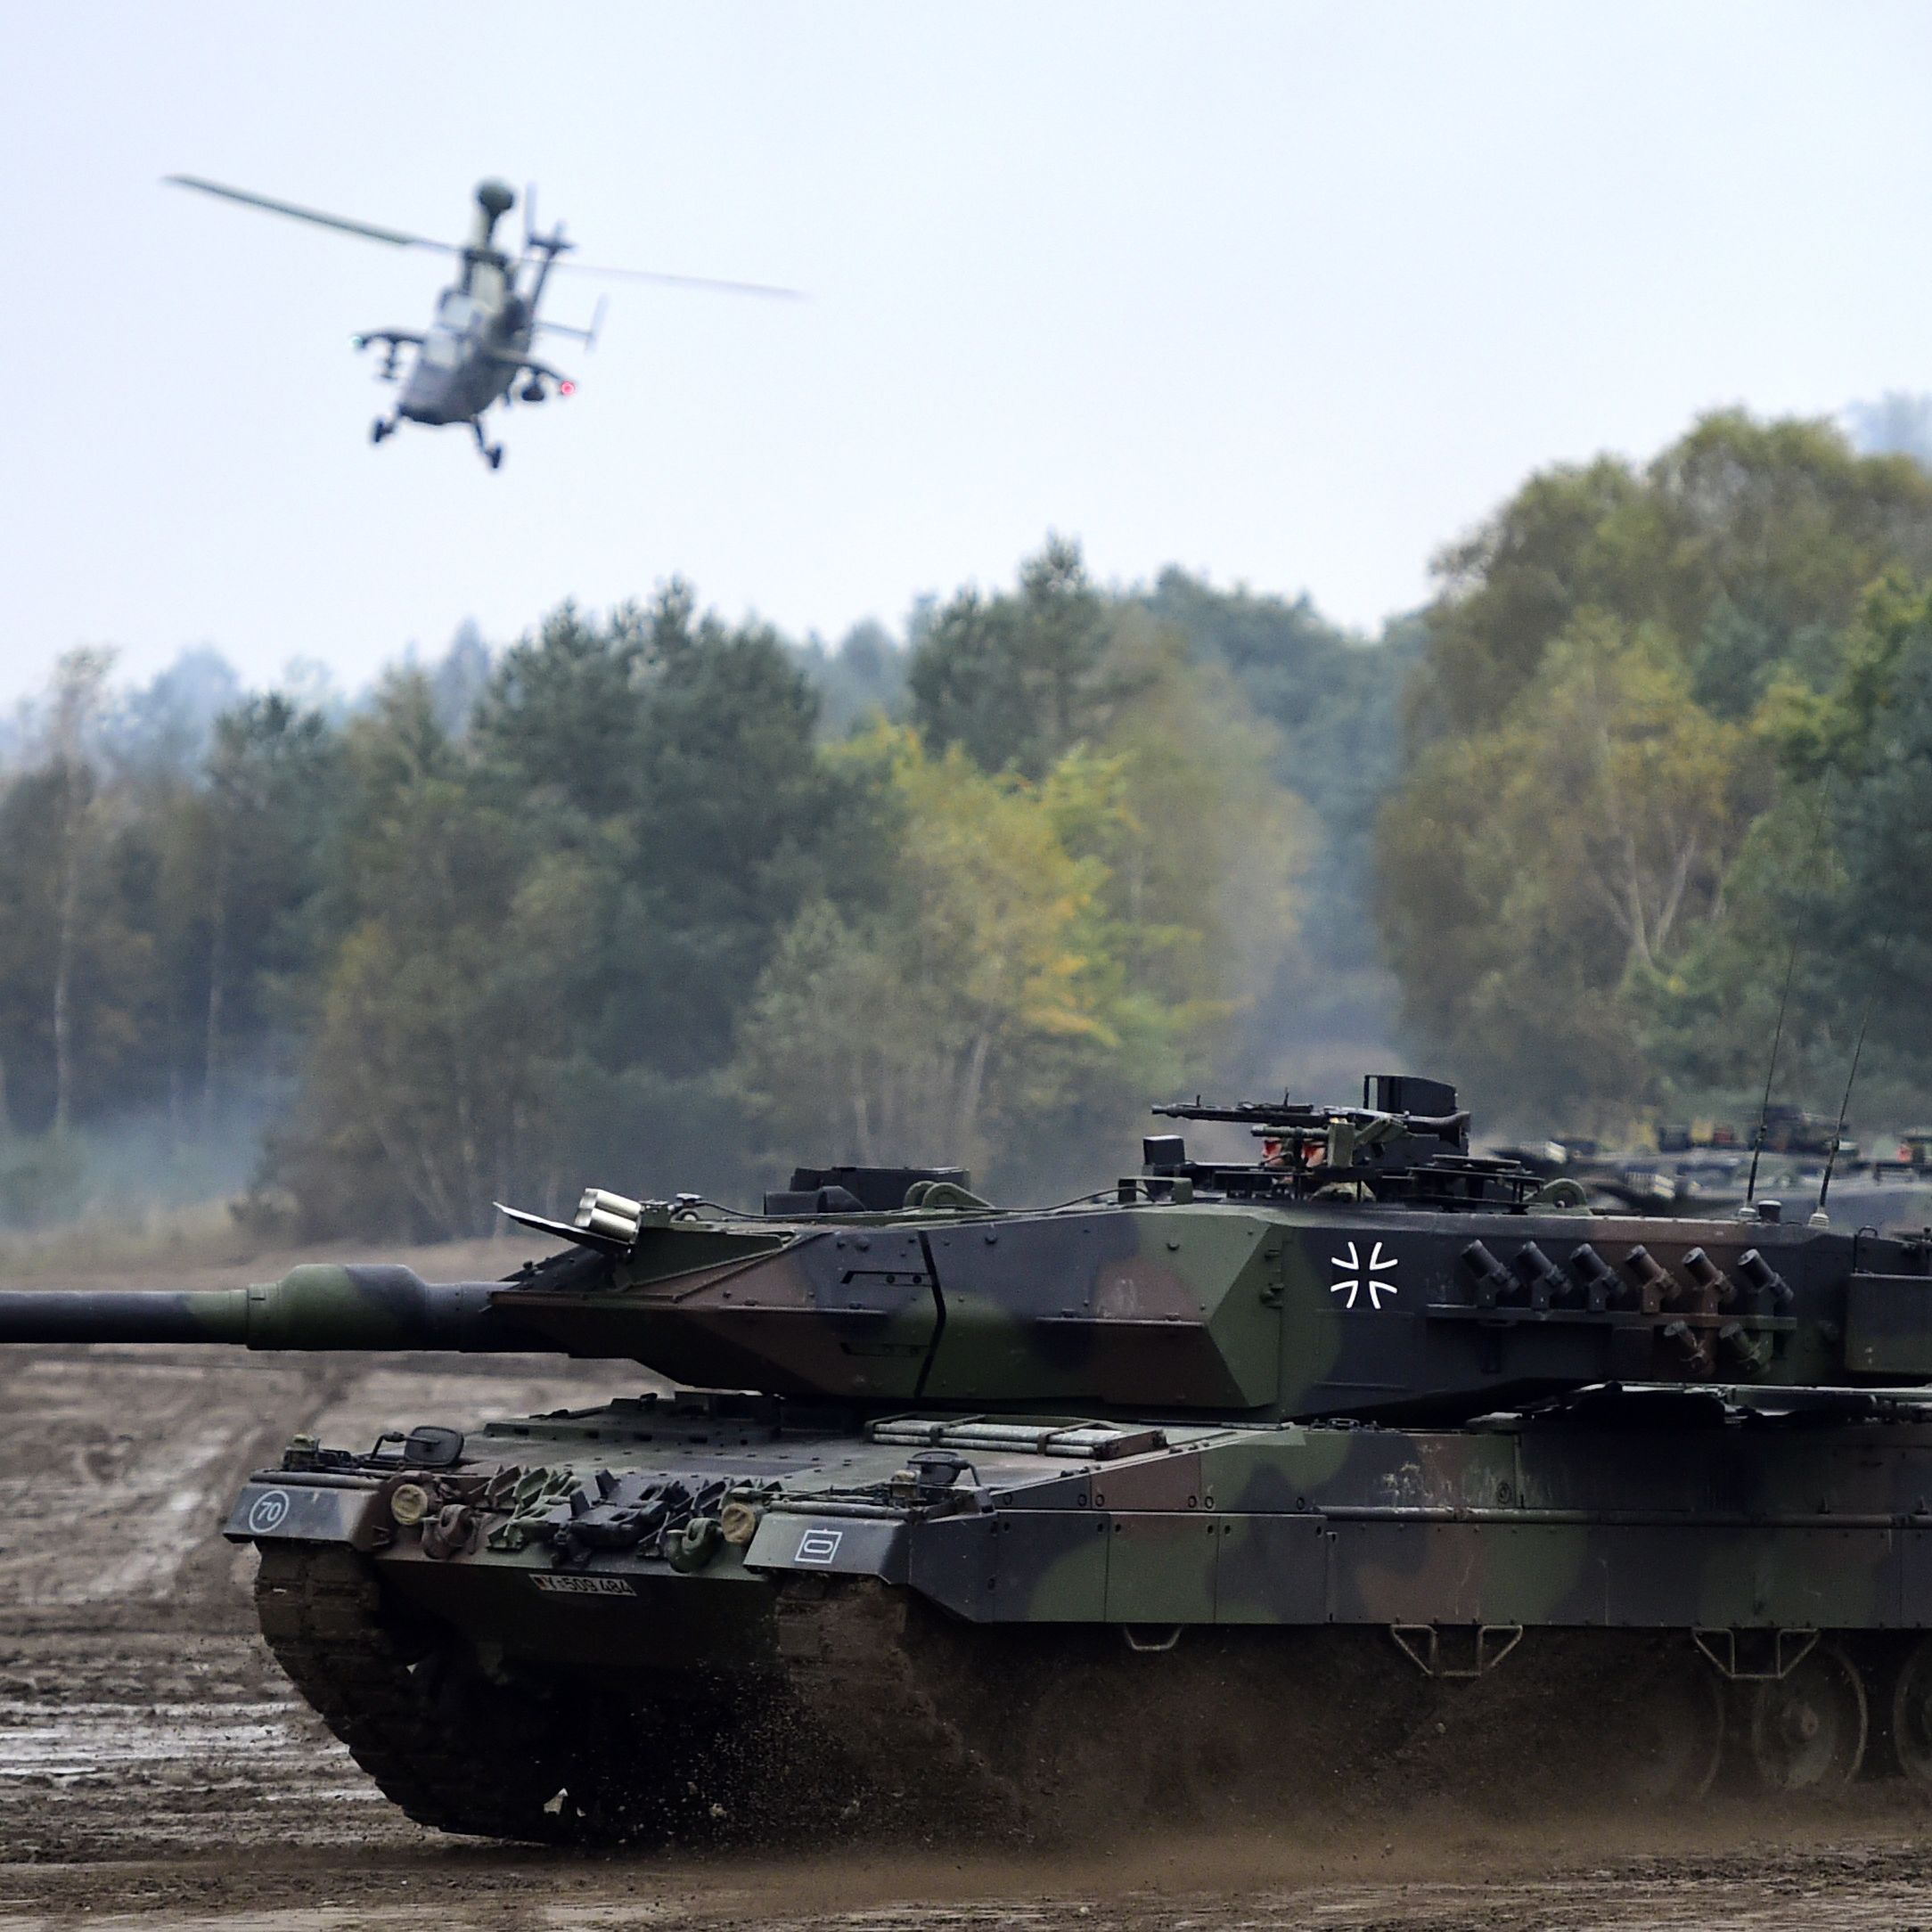 Behind the Leopard 2: The NATO Tank Headed to Ukraine That Everyone Is Talking About